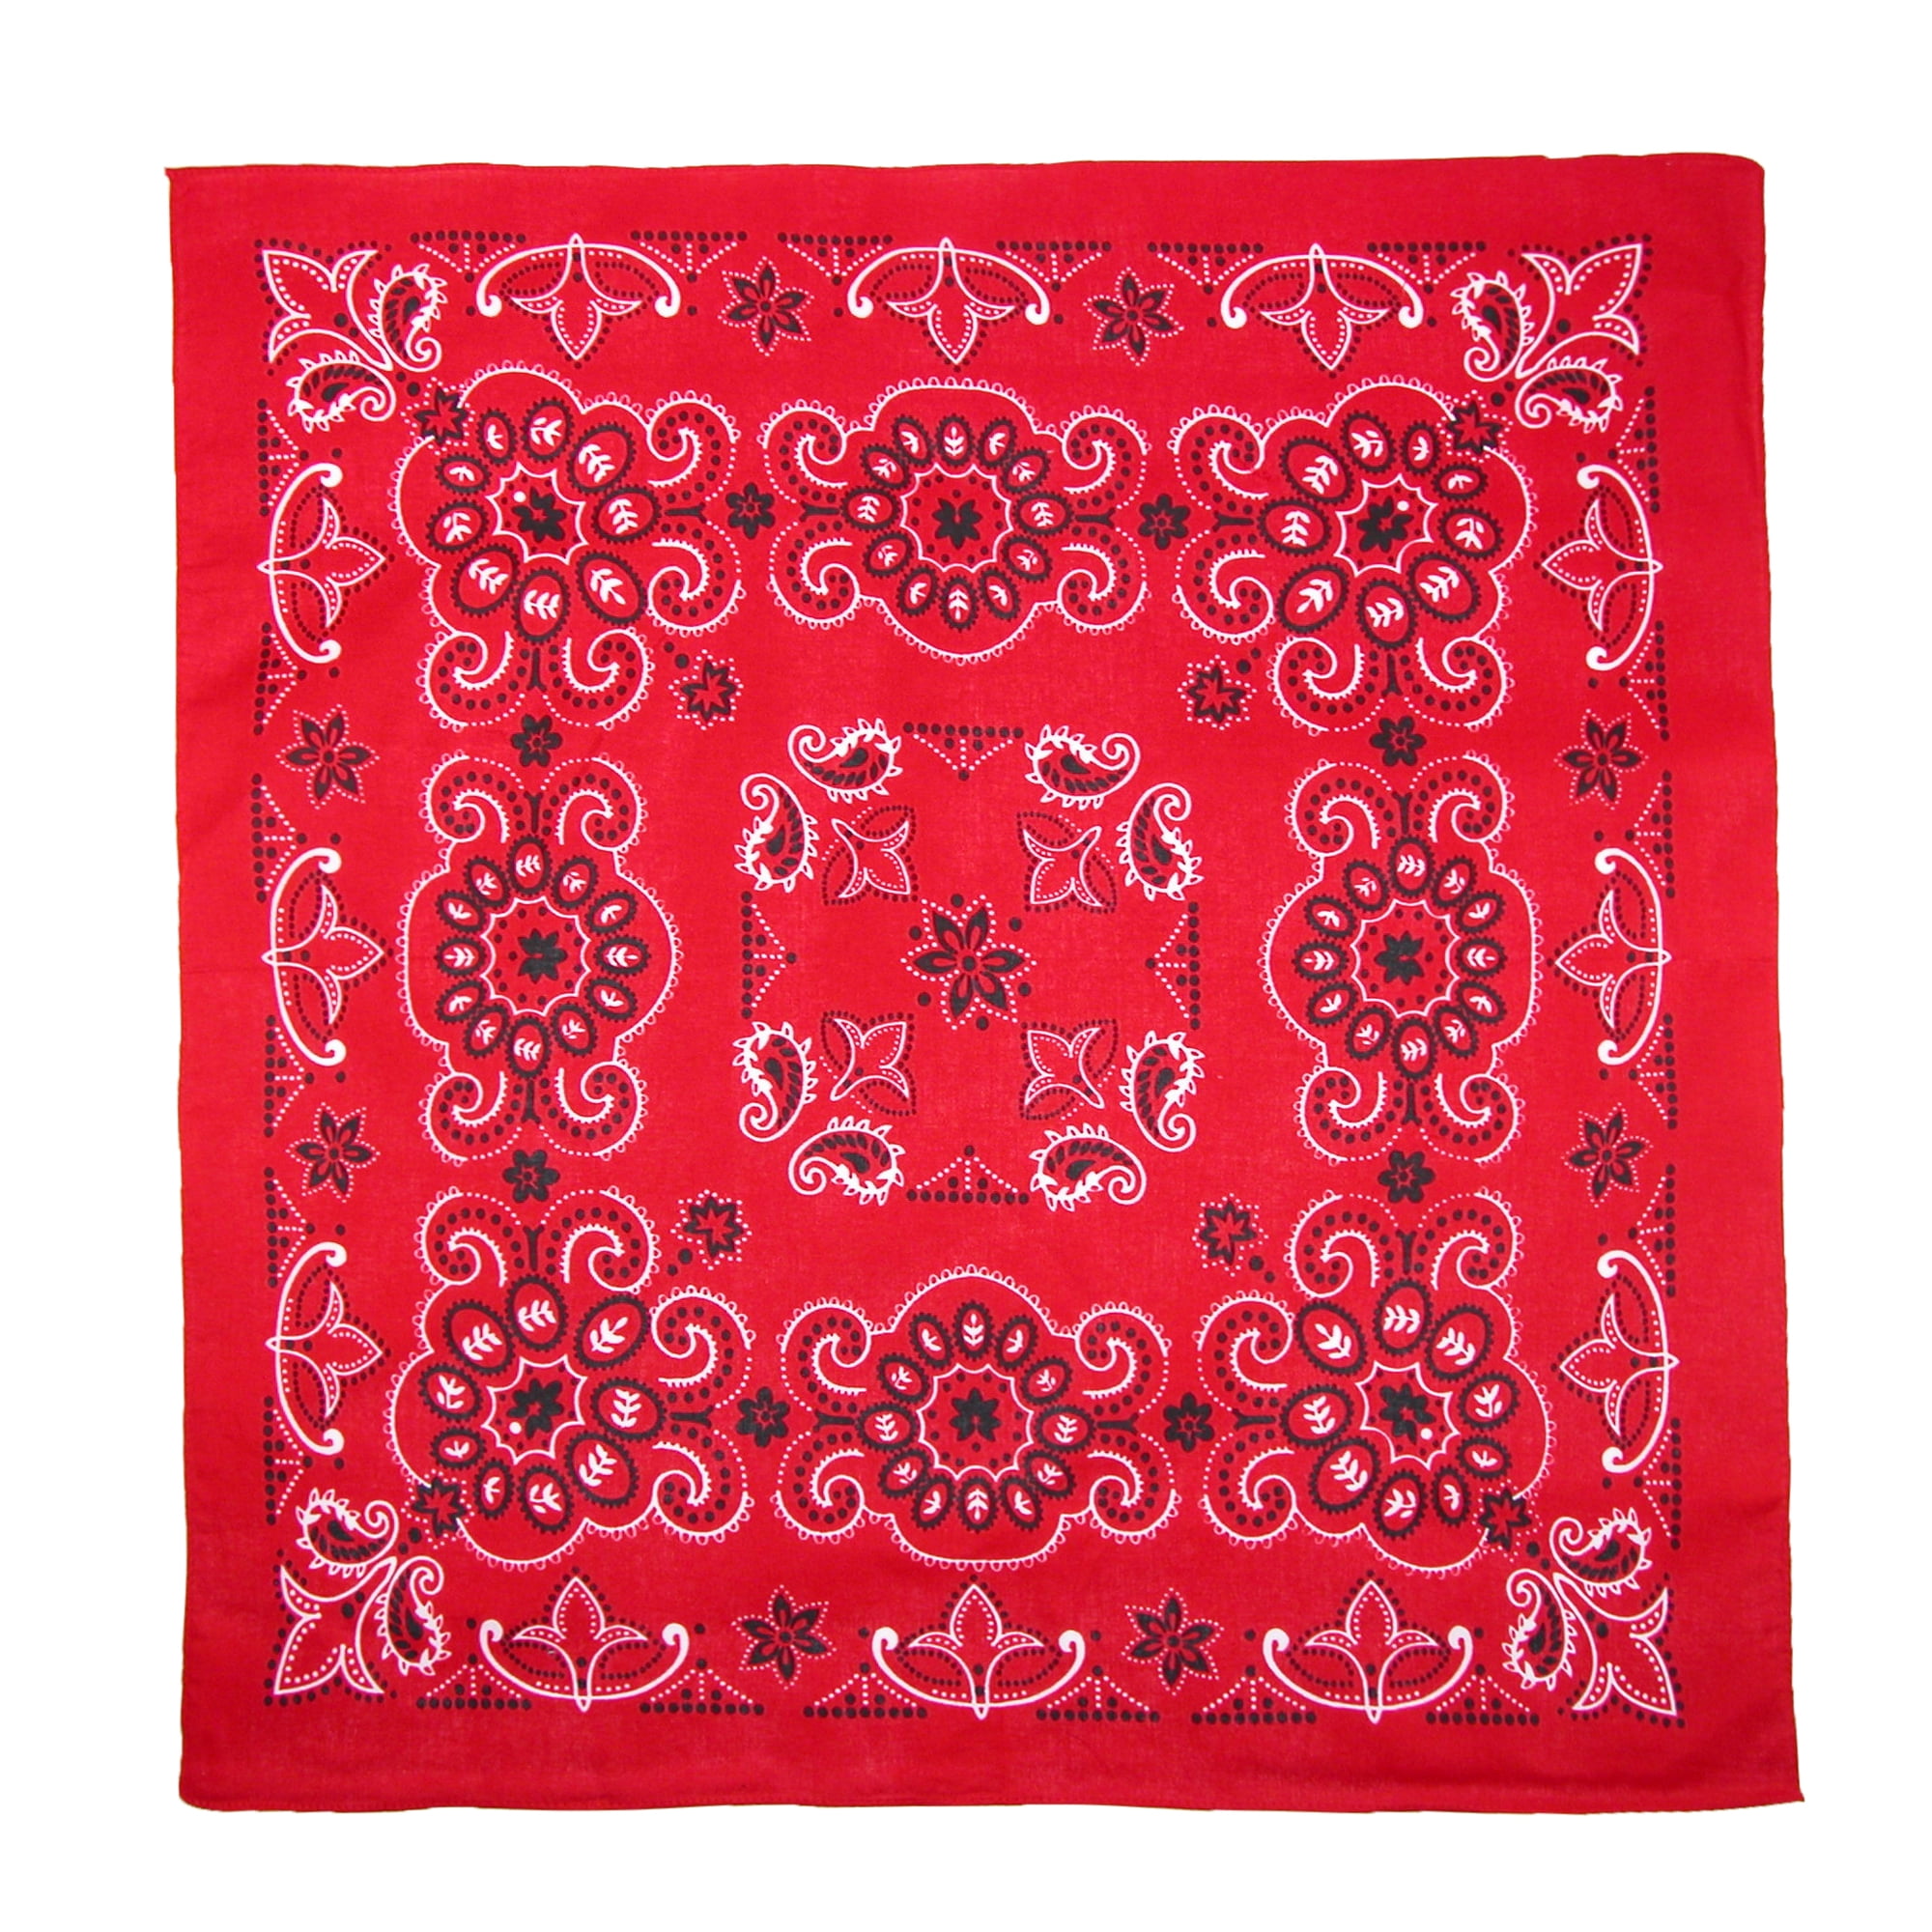 27 x 27 inches Pack of 6 X Large Paisley 100% Cotton Double Sided Printed Bandana 